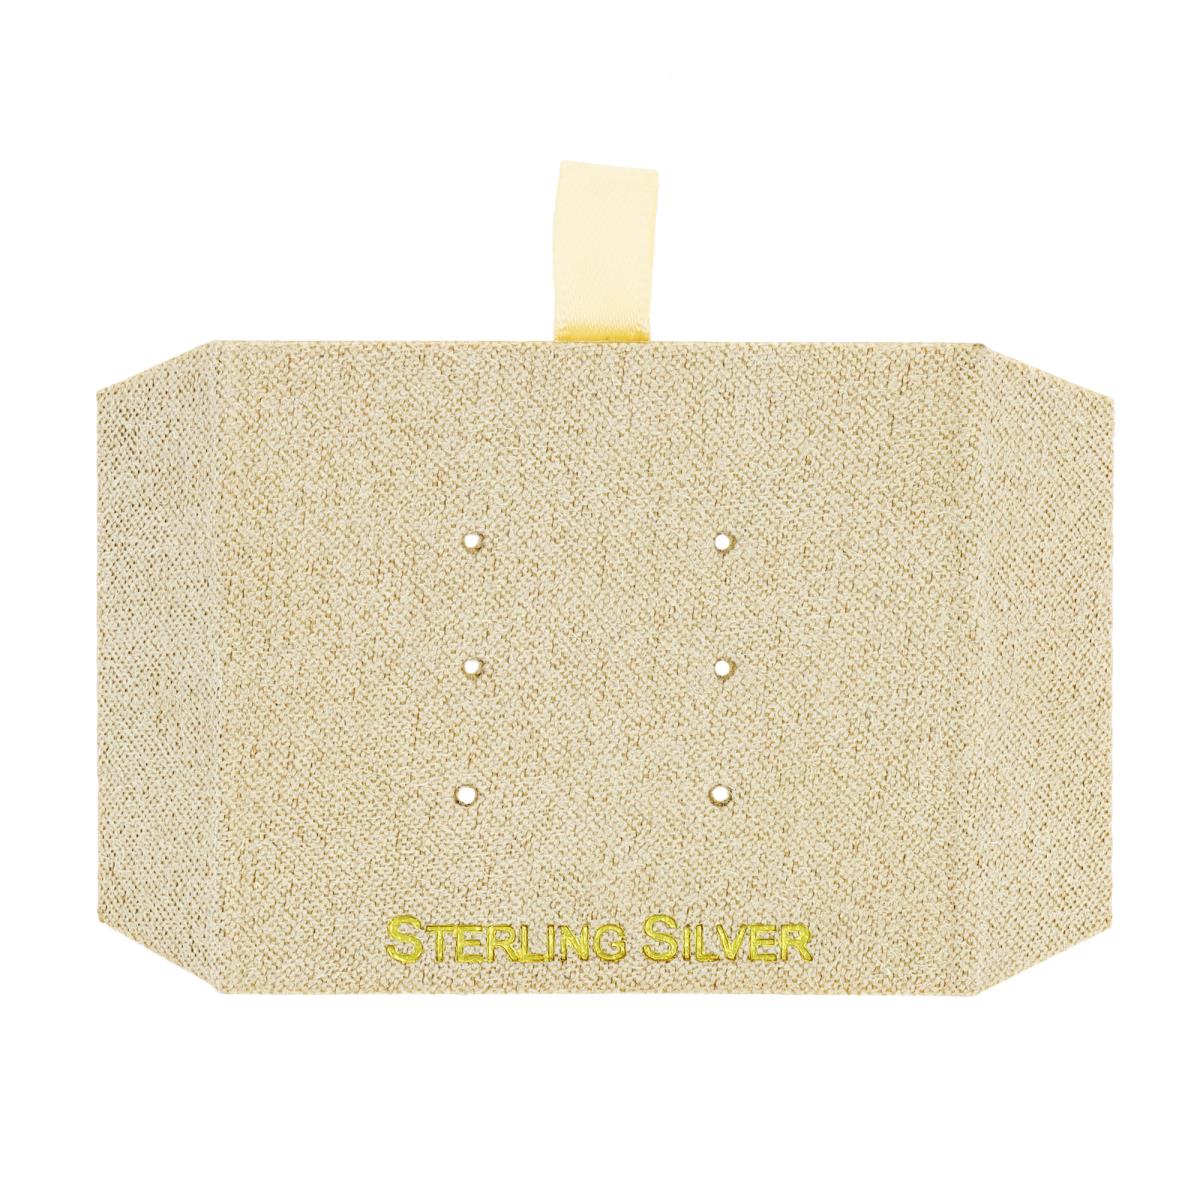 Taupe Sterling Silver,  Gold Foil 3 Stud Insert (Box B06-159/Taupe/M)